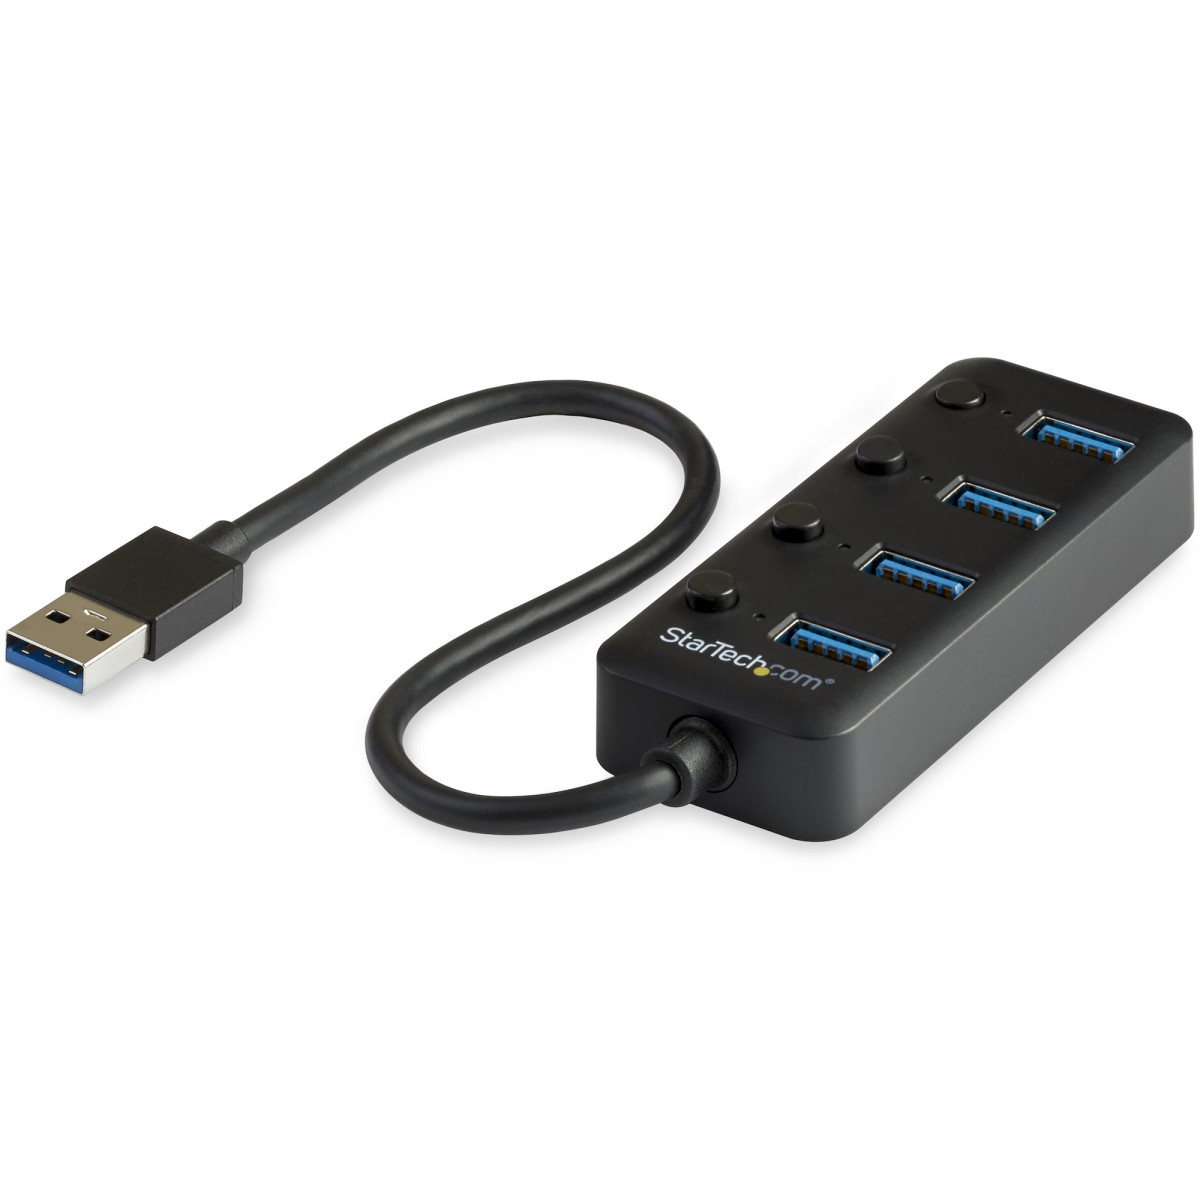 Hub - USB 3 4-Port with On/Off Switches